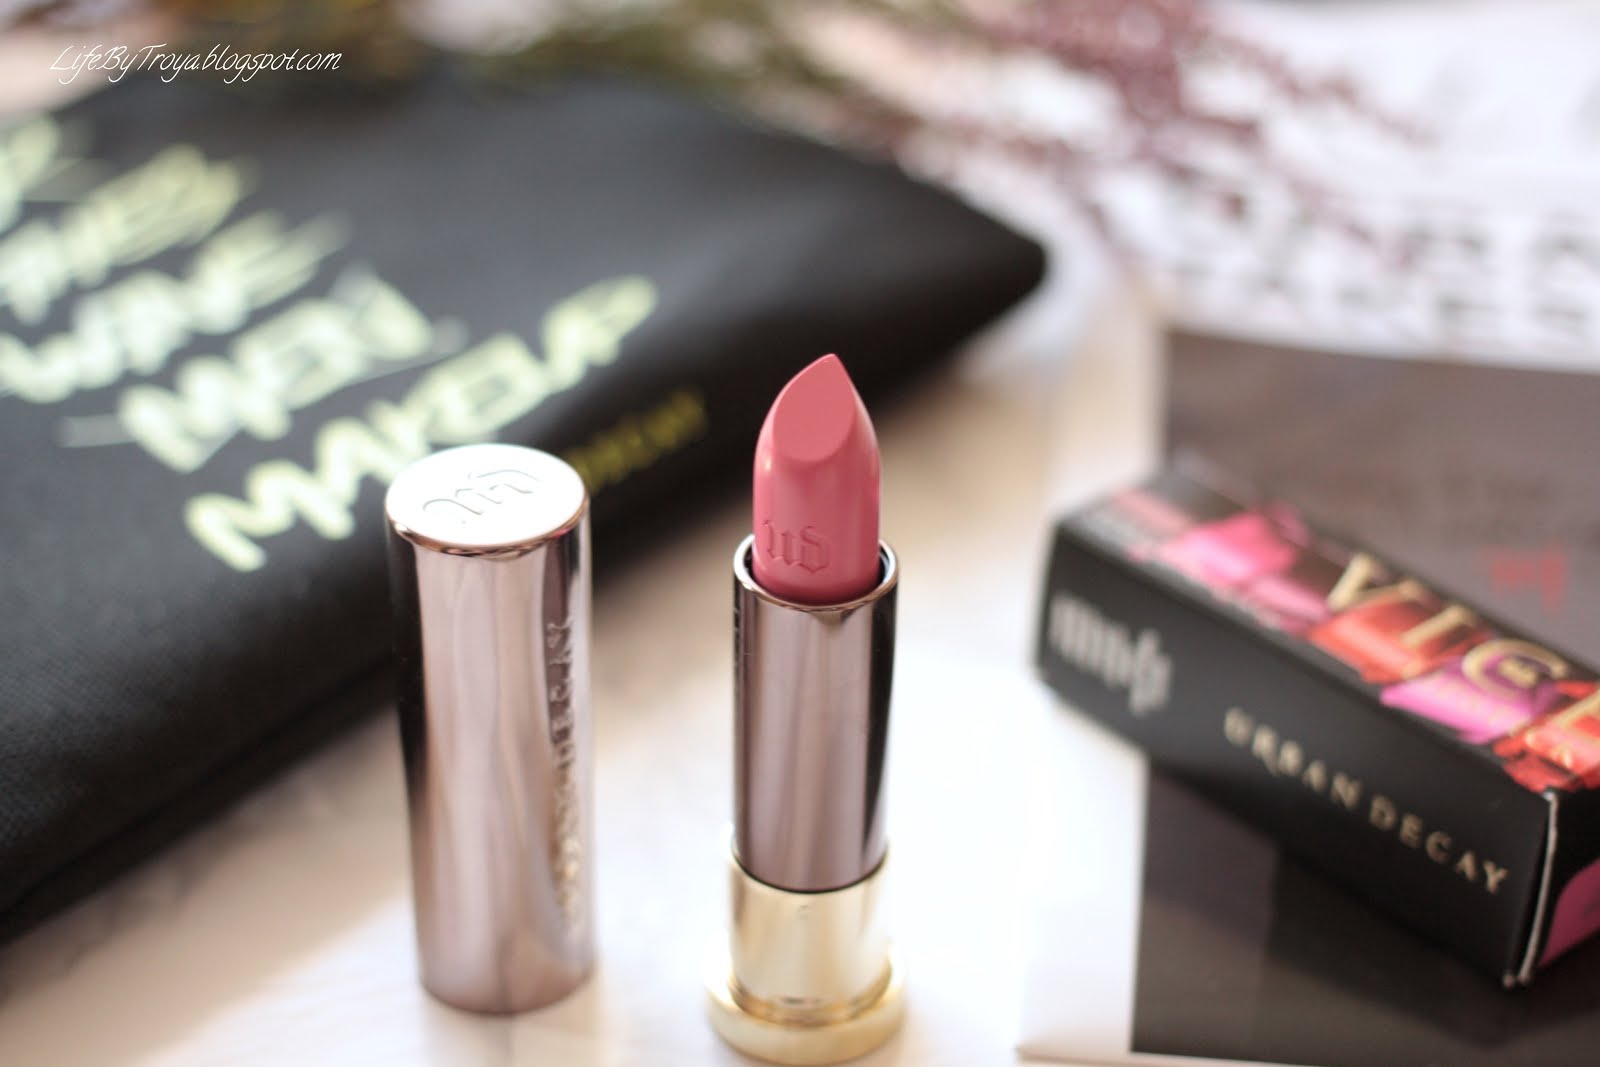 Review:: Urban Decay Vice Lipsticks Obsessed & Uptight.